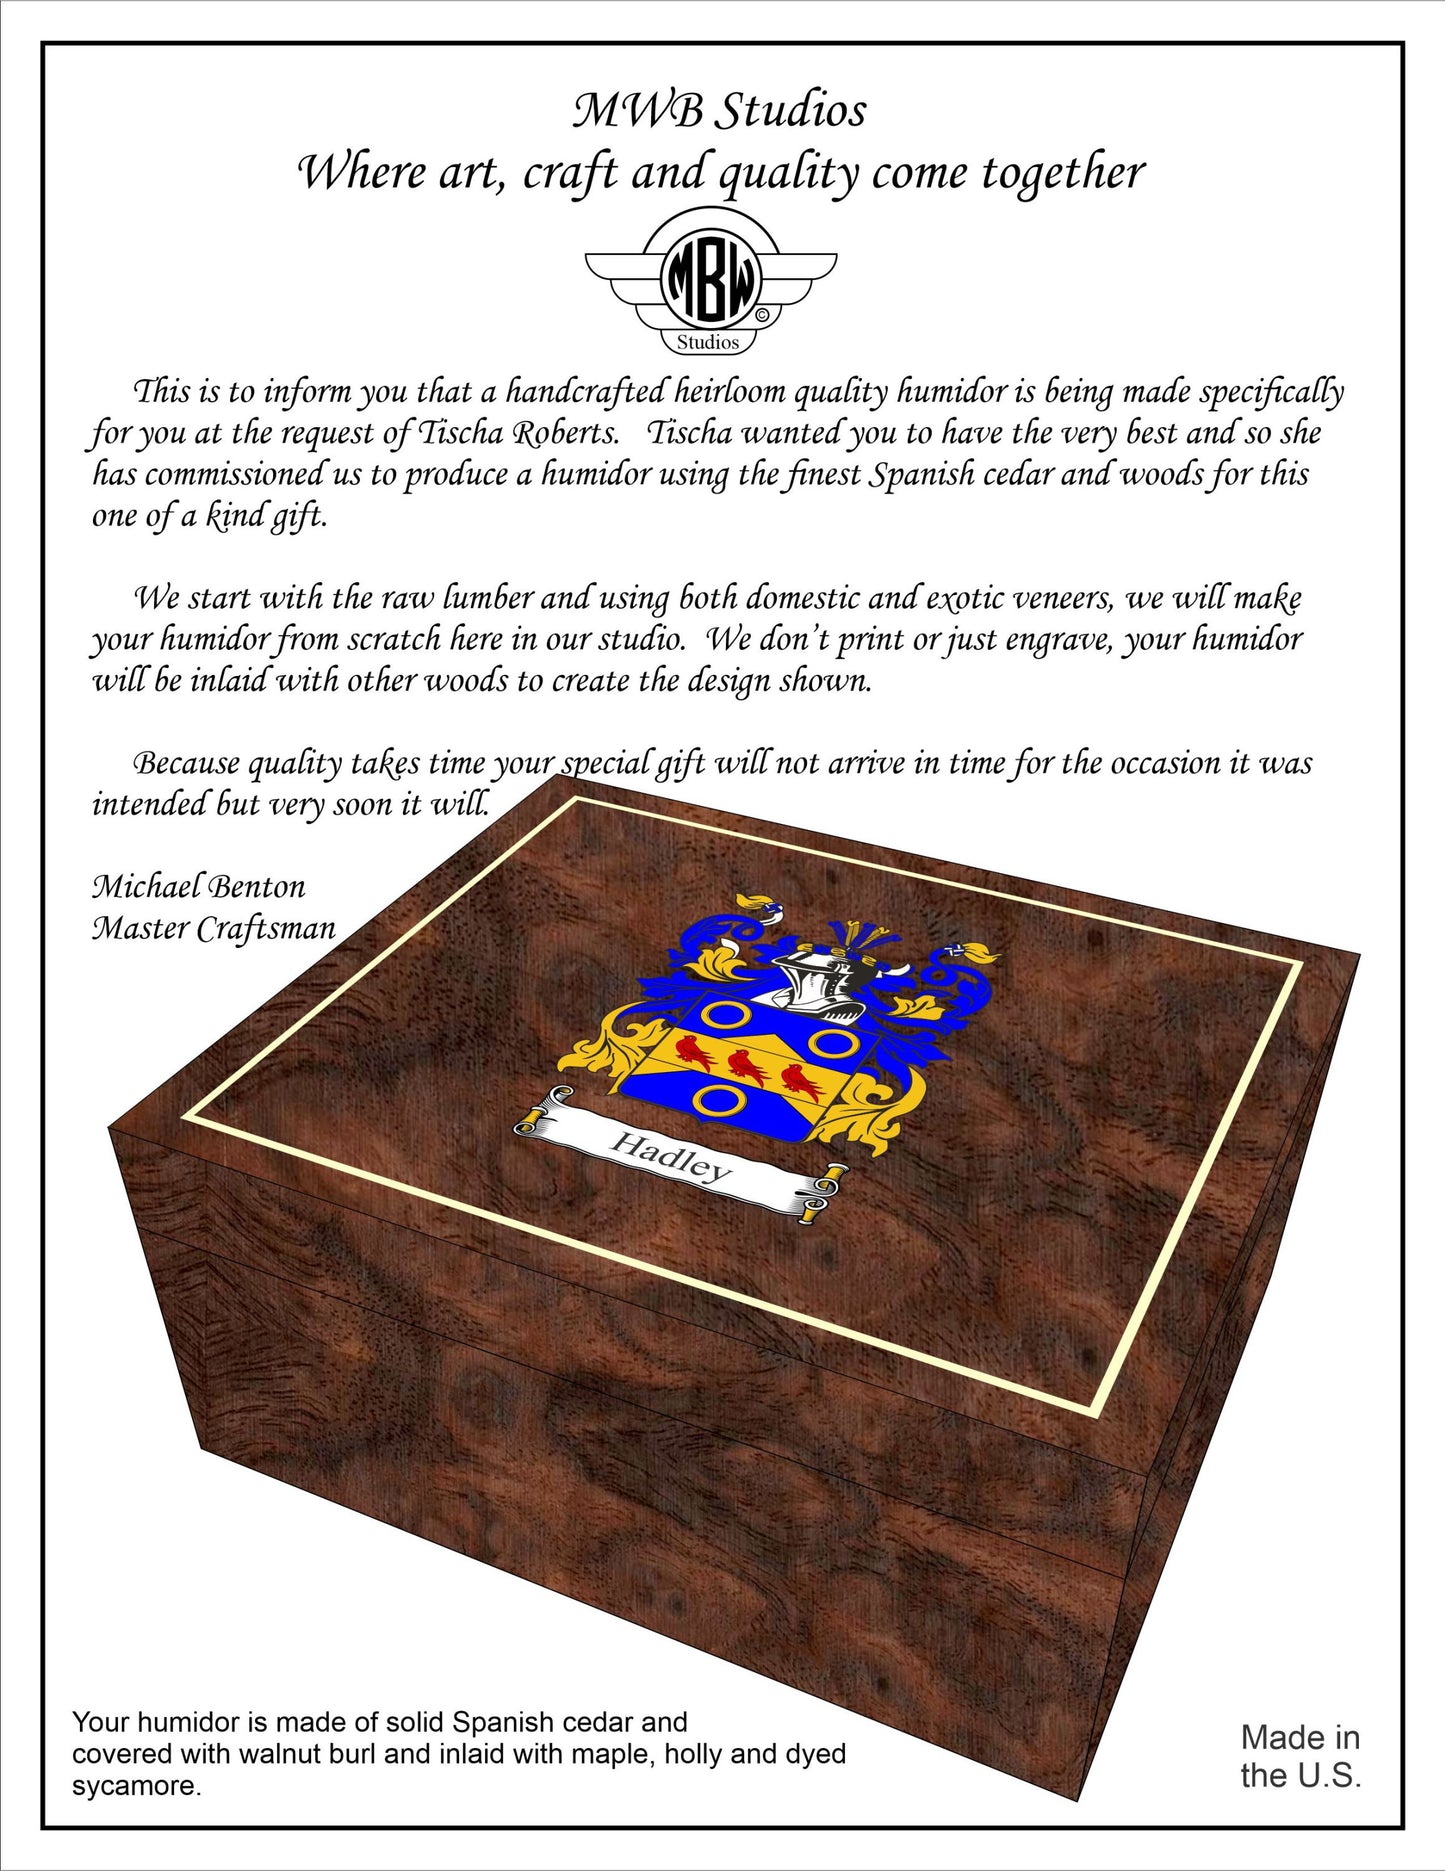 24-Count Custom Humidor (Two-Tone Finish)   Made in the U.S.